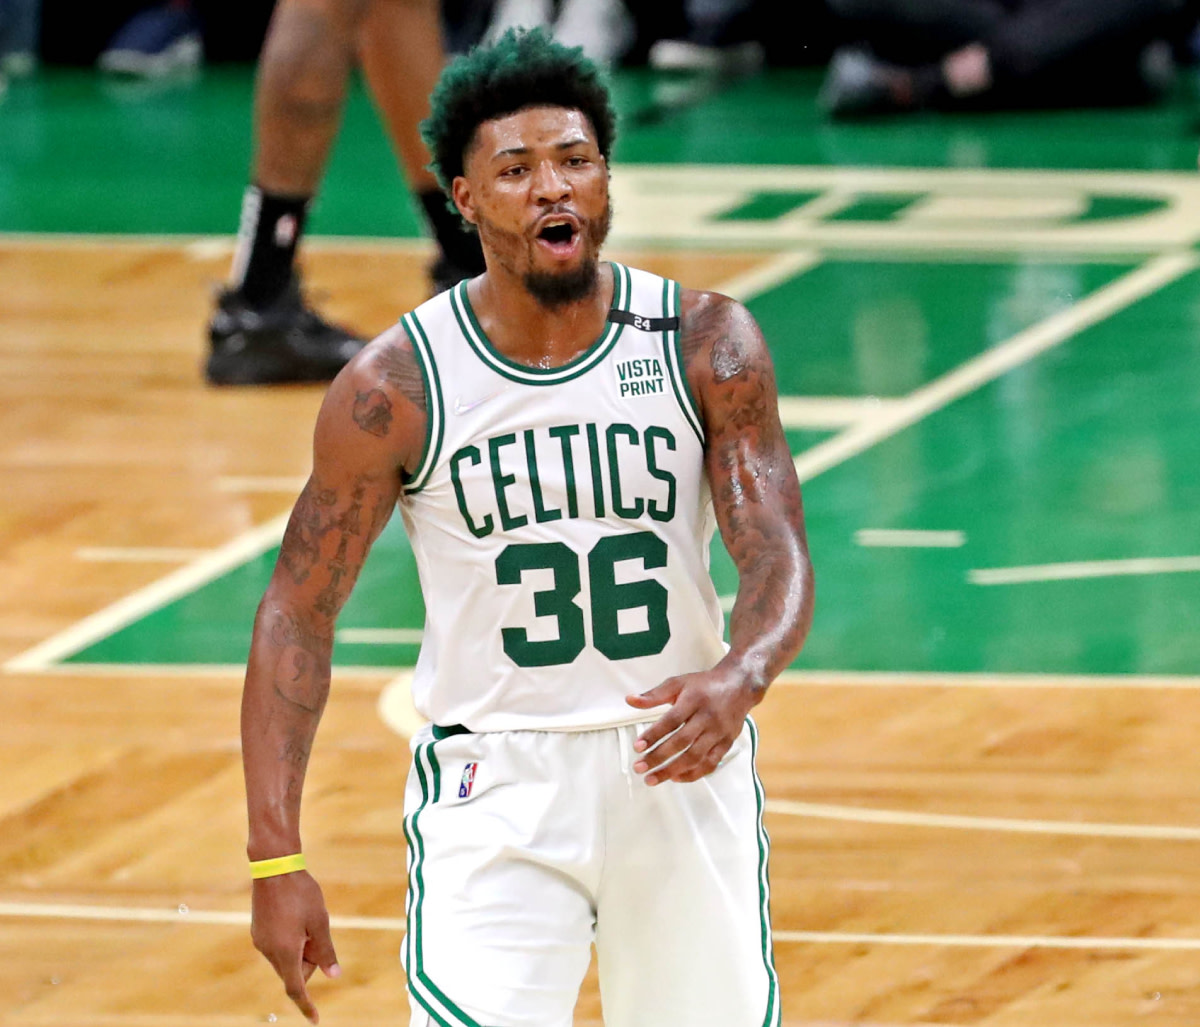 Marcus Smart Opens Up On The Celtics Trading For Malcolm Brogdon: "Really Excited About The Moves Me Today... Banner 18, That's All That's On My Mind."